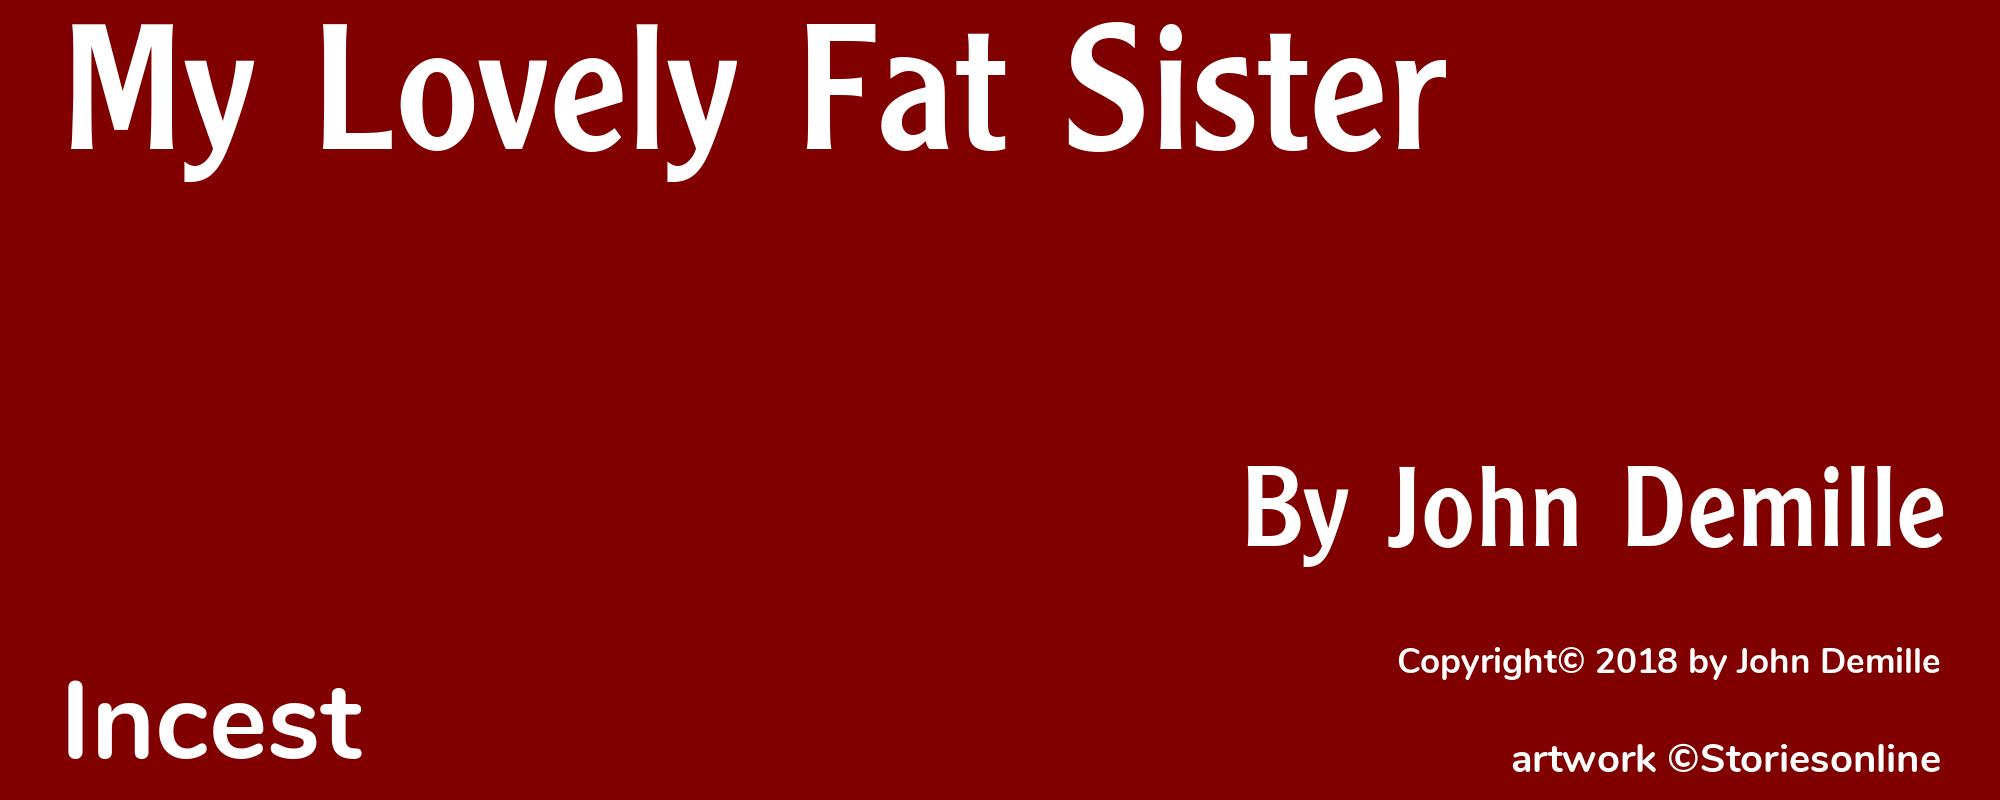 My Lovely Fat Sister - Cover